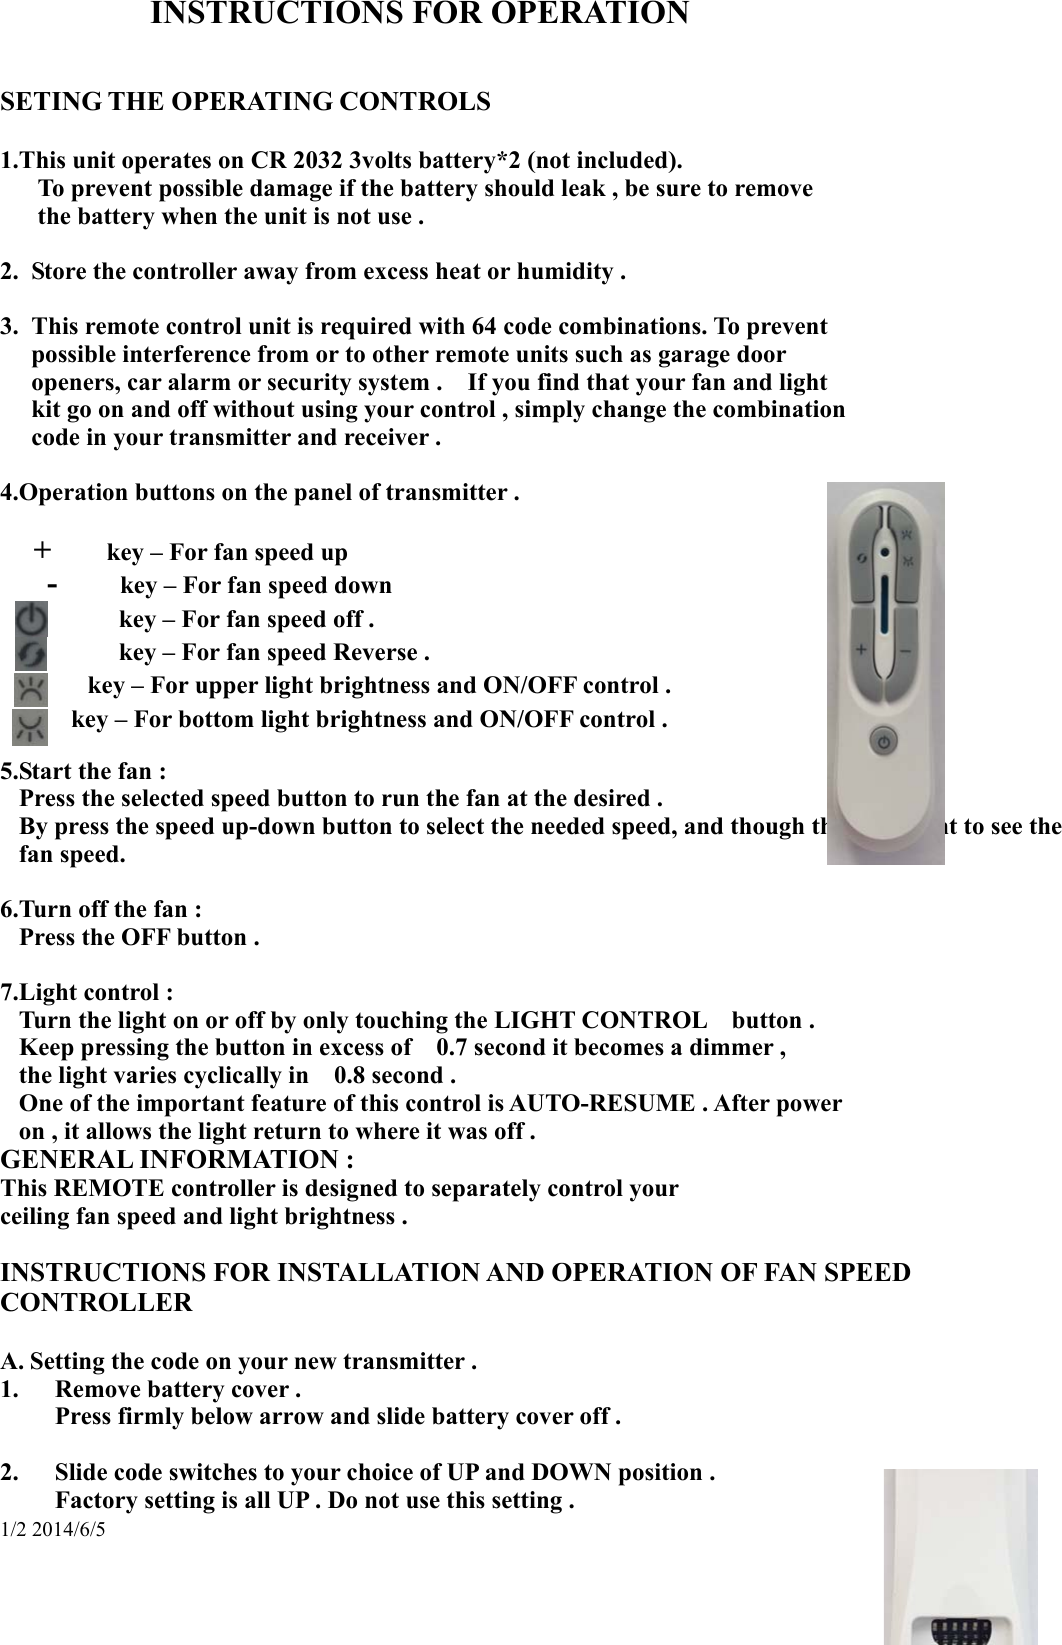 1/2 2014/6/5 INSTRUCTIONS FOR OPERATION   SETING THE OPERATING CONTROLS  1.This unit operates on CR 2032 3volts battery*2 (not included).    To prevent possible damage if the battery should leak , be sure to remove    the battery when the unit is not use .  2.  Store the controller away from excess heat or humidity .  3.  This remote control unit is required with 64 code combinations. To prevent   possible interference from or to other remote units such as garage door   openers, car alarm or security system .    If you find that your fan and light     kit go on and off without using your control , simply change the combination   code in your transmitter and receiver .  4.Operation buttons on the panel of transmitter .     +     key – For fan speed up    -    key – For fan speed down         key – For fan speed off .         key – For fan speed Reverse .    key – For upper light brightness and ON/OFF control . key – For bottom light brightness and ON/OFF control .  5.Start the fan : Press the selected speed button to run the fan at the desired . By press the speed up-down button to select the needed speed, and though the LED light to see the fan speed.    6.Turn off the fan : Press the OFF button .  7.Light control : Turn the light on or off by only touching the LIGHT CONTROL    button . Keep pressing the button in excess of    0.7 second it becomes a dimmer , the light varies cyclically in    0.8 second . One of the important feature of this control is AUTO-RESUME . After power   on , it allows the light return to where it was off . GENERAL INFORMATION : This REMOTE controller is designed to separately control your   ceiling fan speed and light brightness .    INSTRUCTIONS FOR INSTALLATION AND OPERATION OF FAN SPEED CONTROLLER  A. Setting the code on your new transmitter . 1. Remove battery cover . Press firmly below arrow and slide battery cover off .  2. Slide code switches to your choice of UP and DOWN position .     Factory setting is all UP . Do not use this setting . 